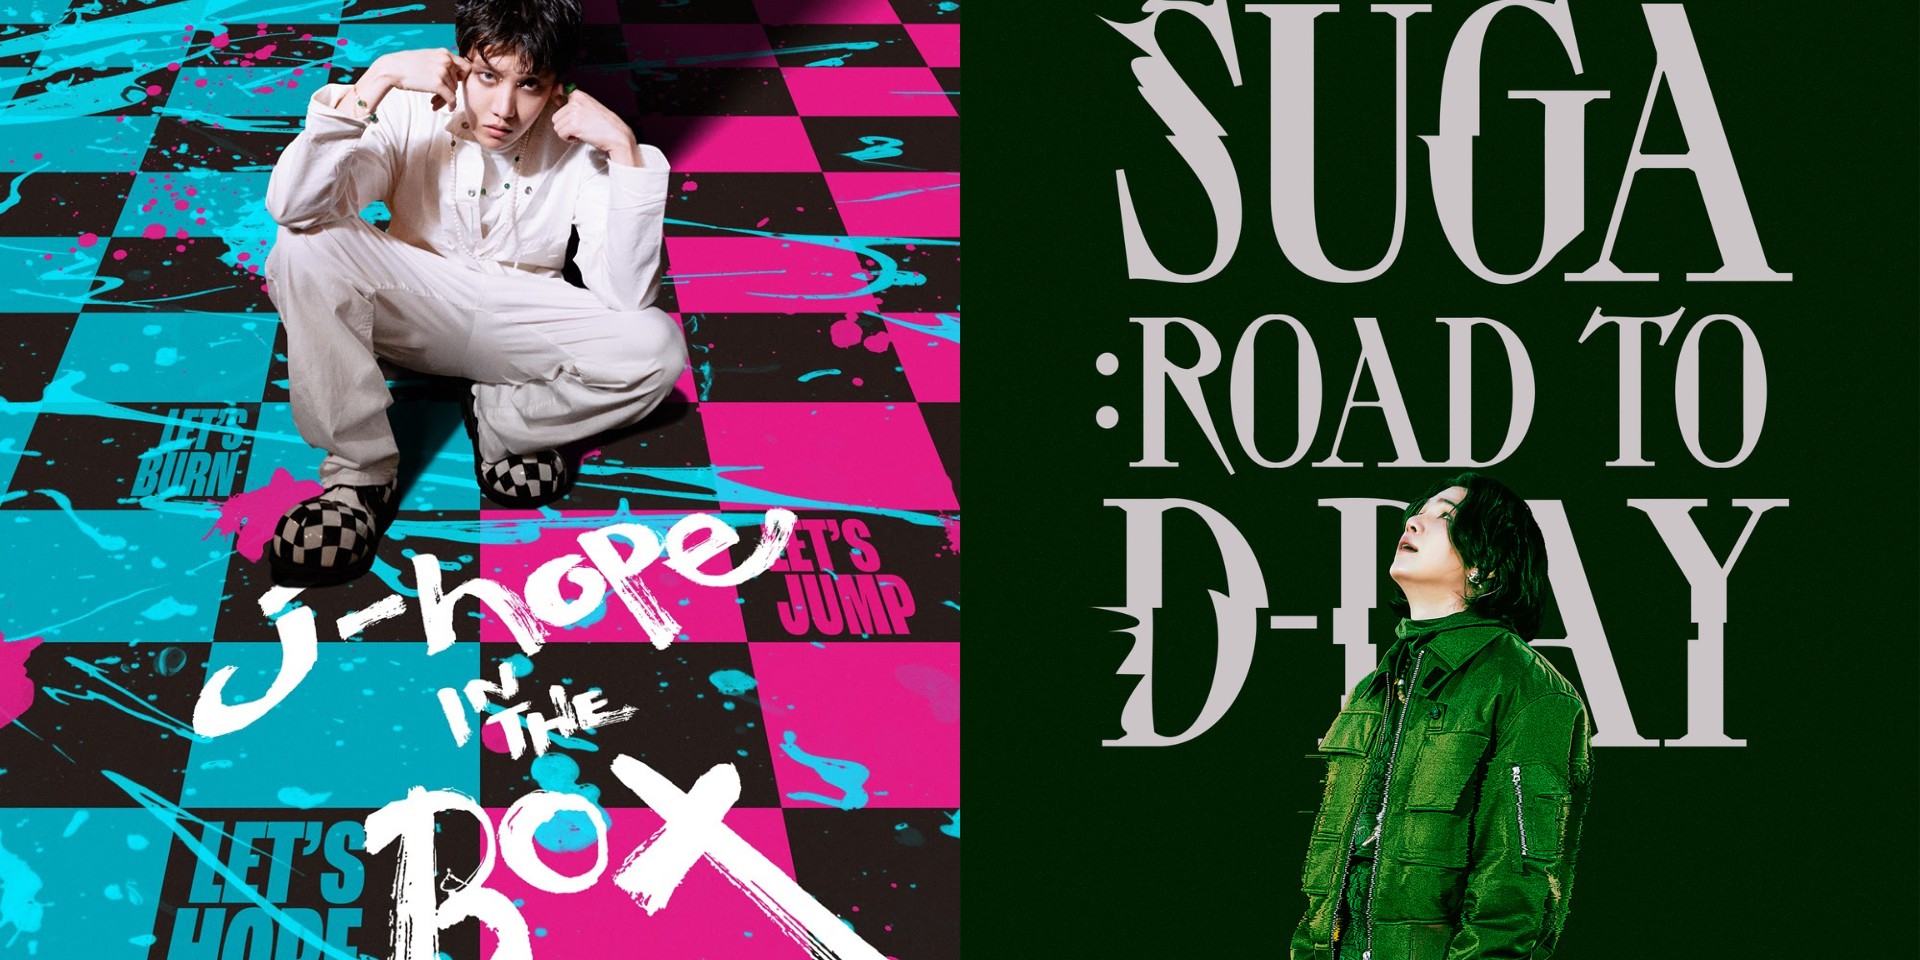 BTS' solo documentaries to have global cinema screenings this June – ‘j-hope IN THE BOX' and 'SUGA: Road to D-DAY'